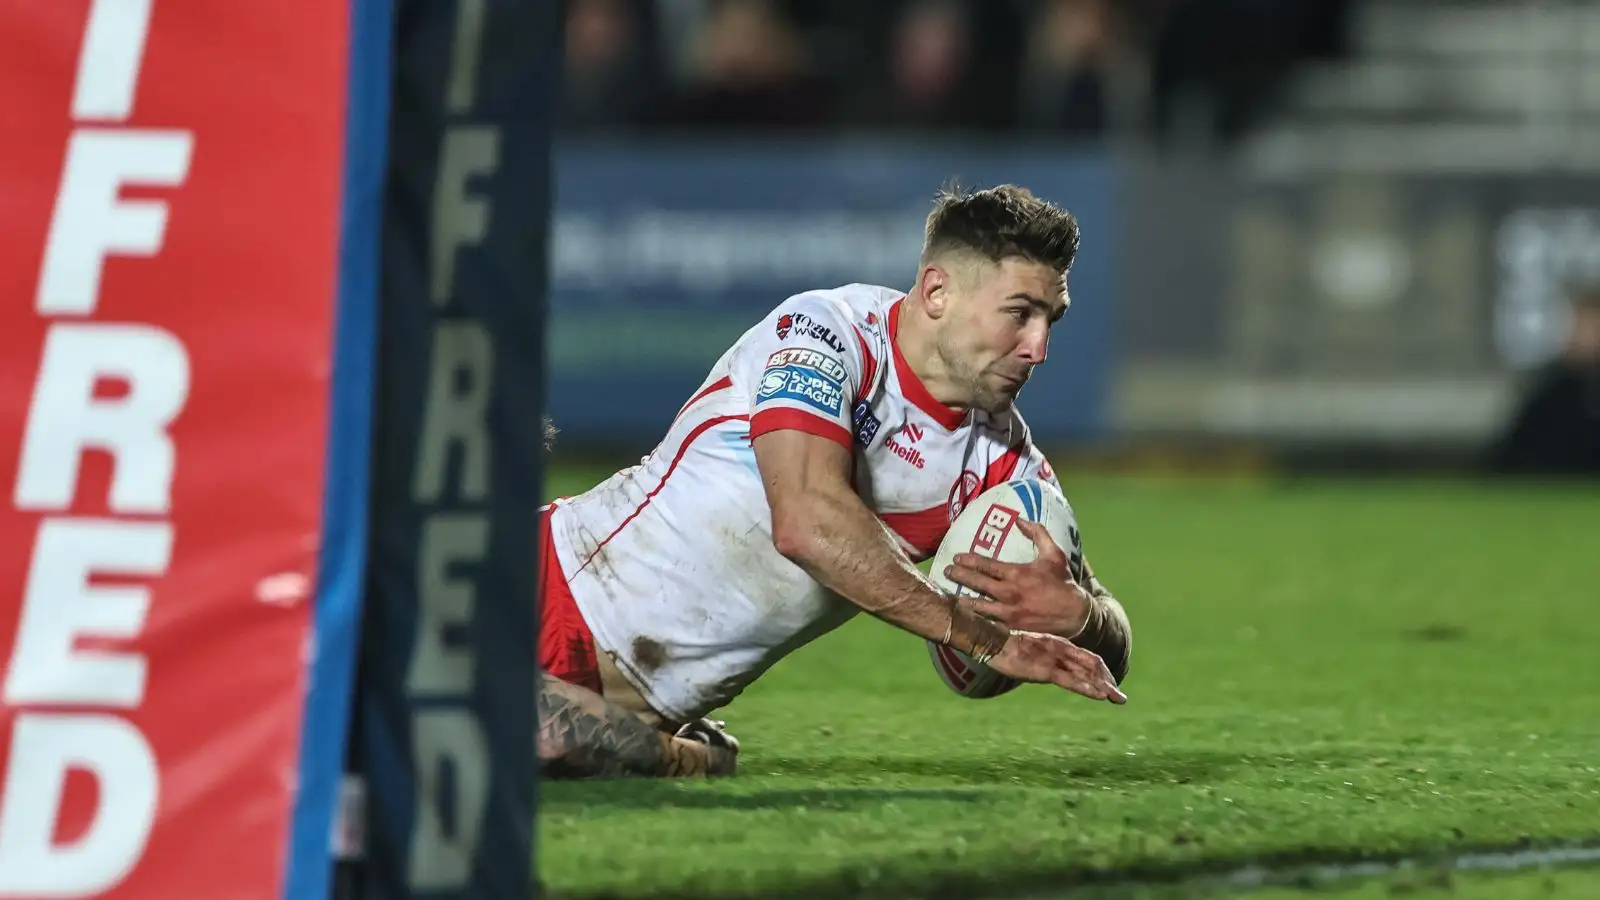 St Helens’ Tommy Makinson magnanimous in victory as winger hails ‘proper Good Friday battle’